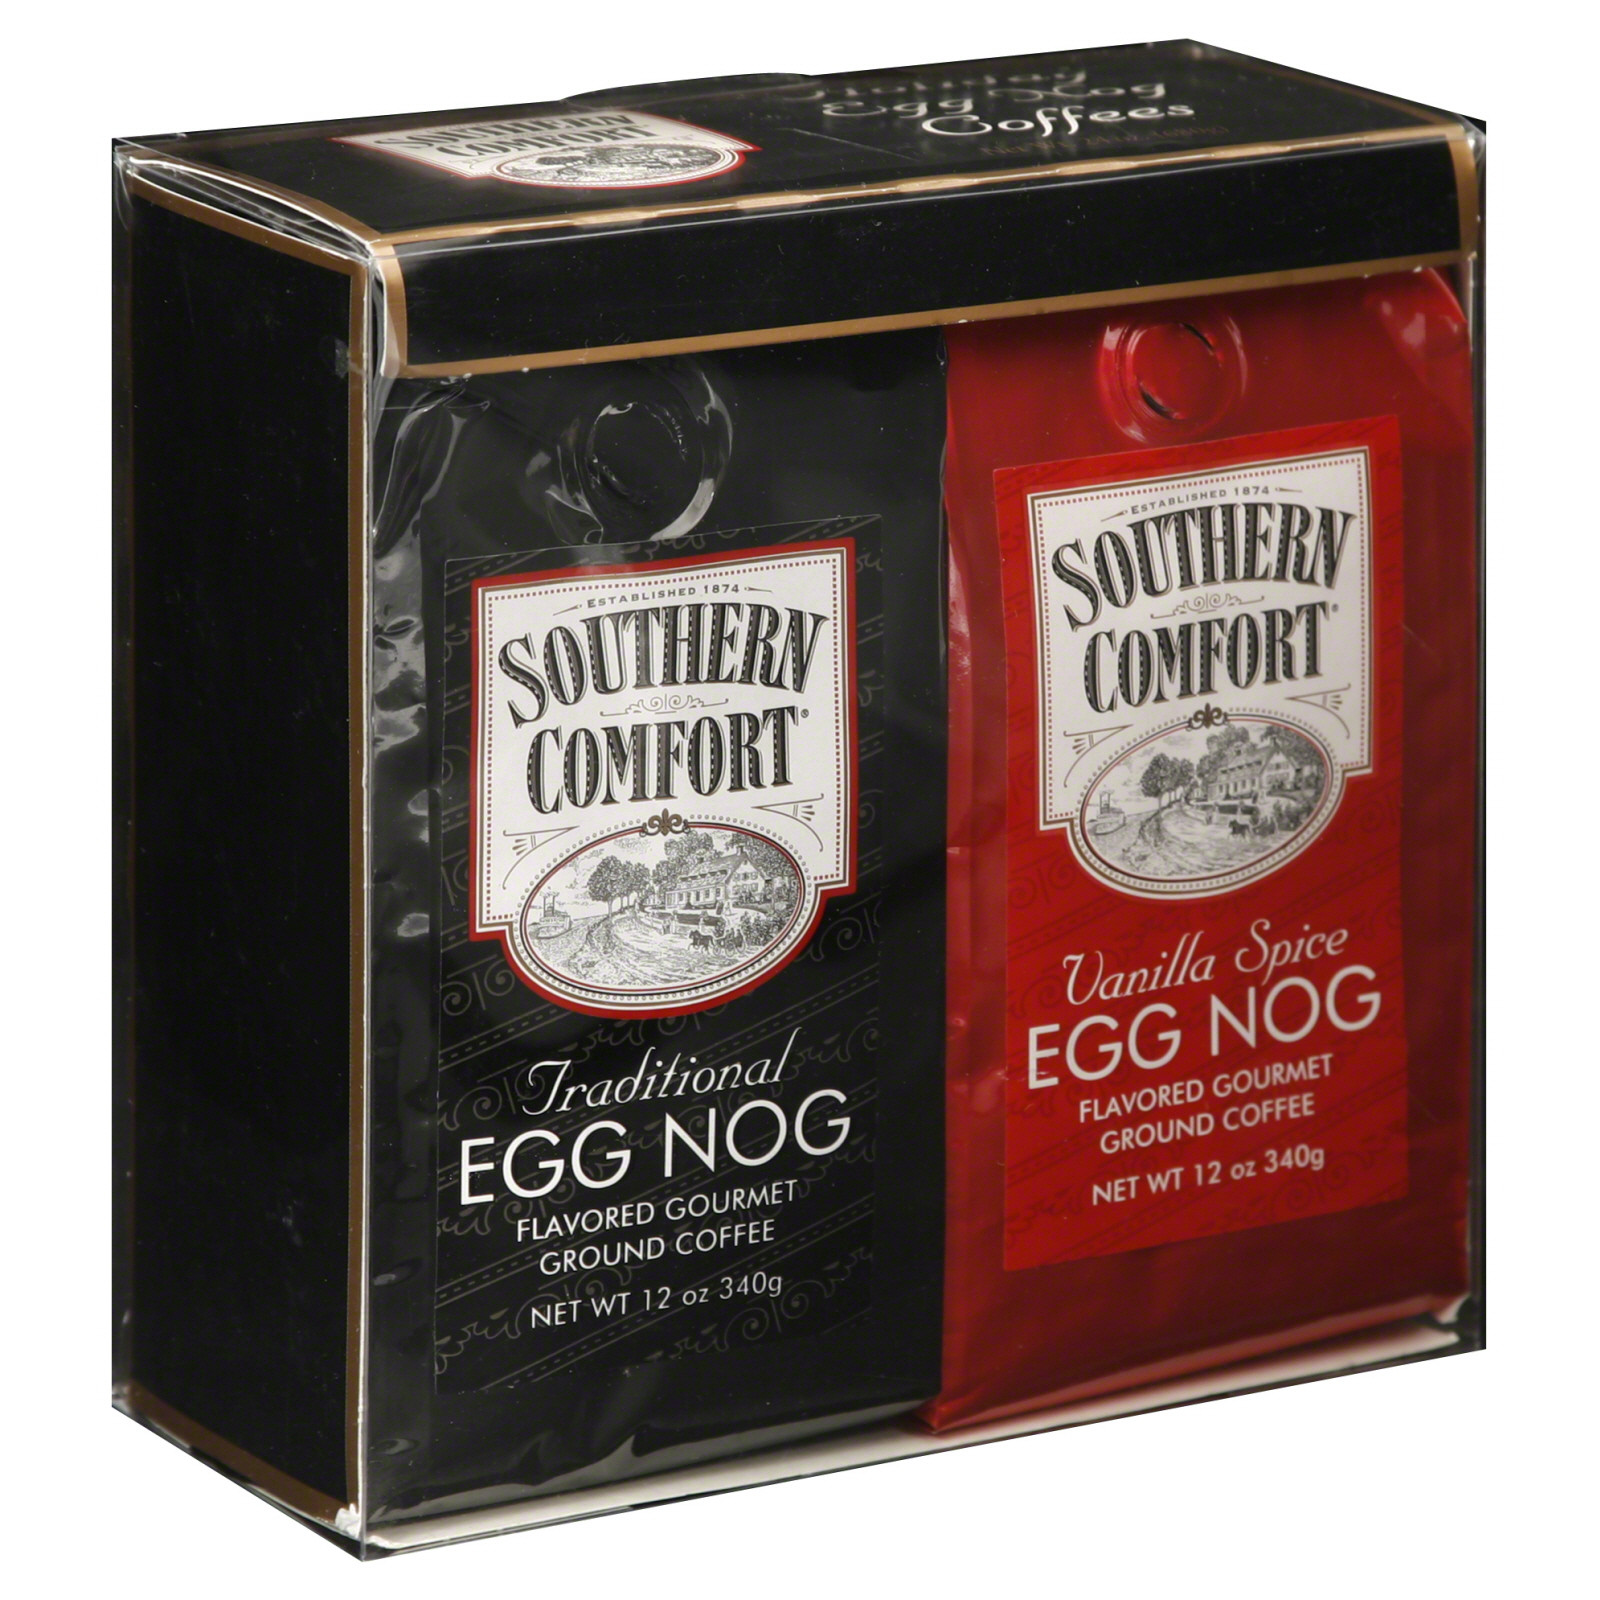 Southern Comfort Vanilla Spice Eggnog
 Southern fort Coffee Flavored Gourmet Ground